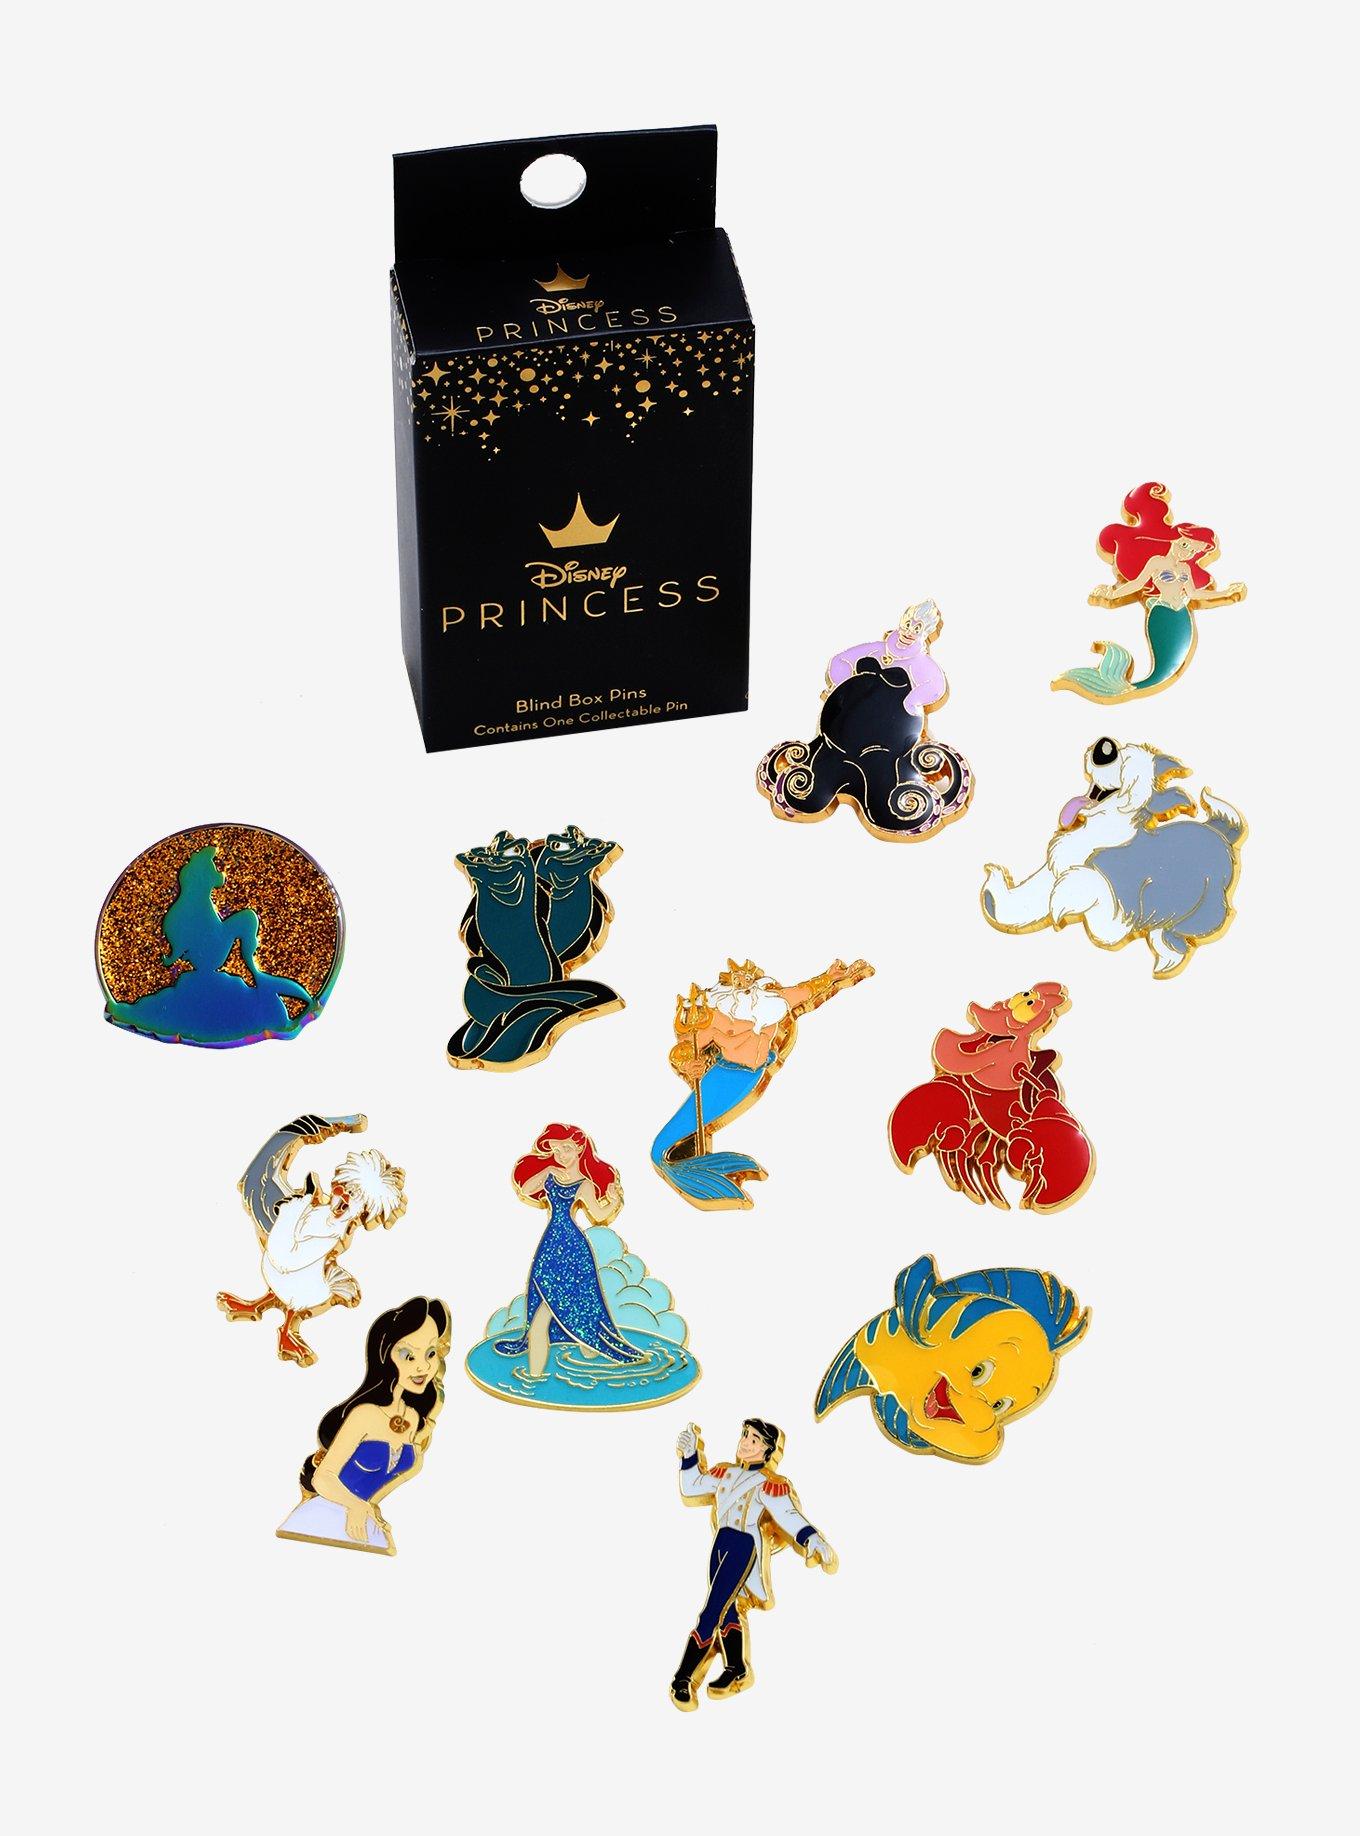 The Little Mermaid Live Action Disney Pins at BoxLunch - Disney